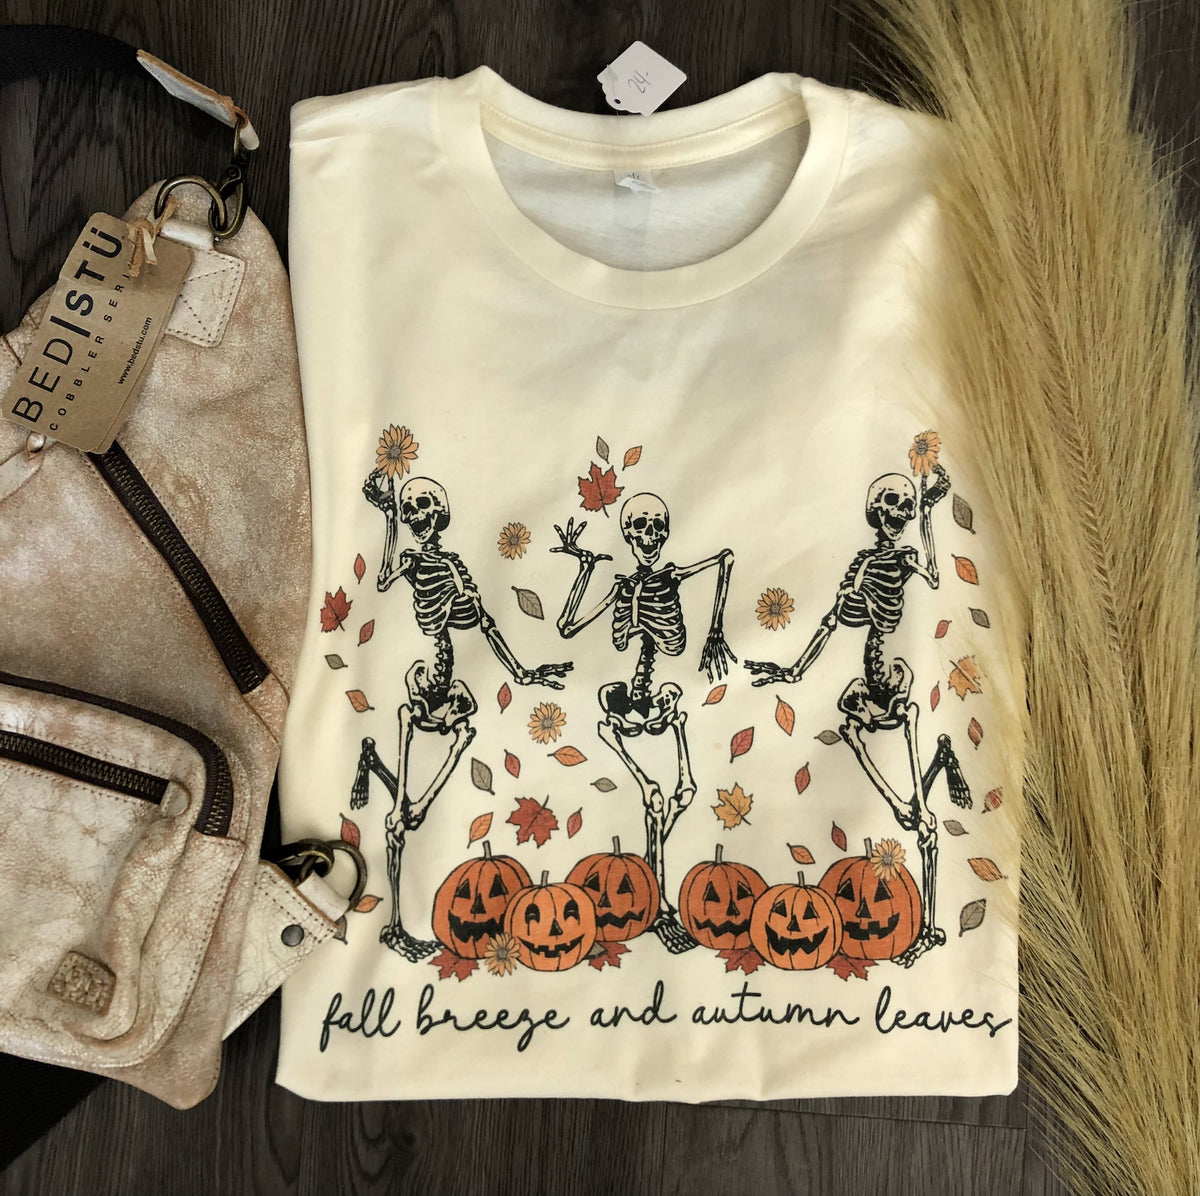 Fall Breeze and Autumn Leaves Skeleton Graphic Tee